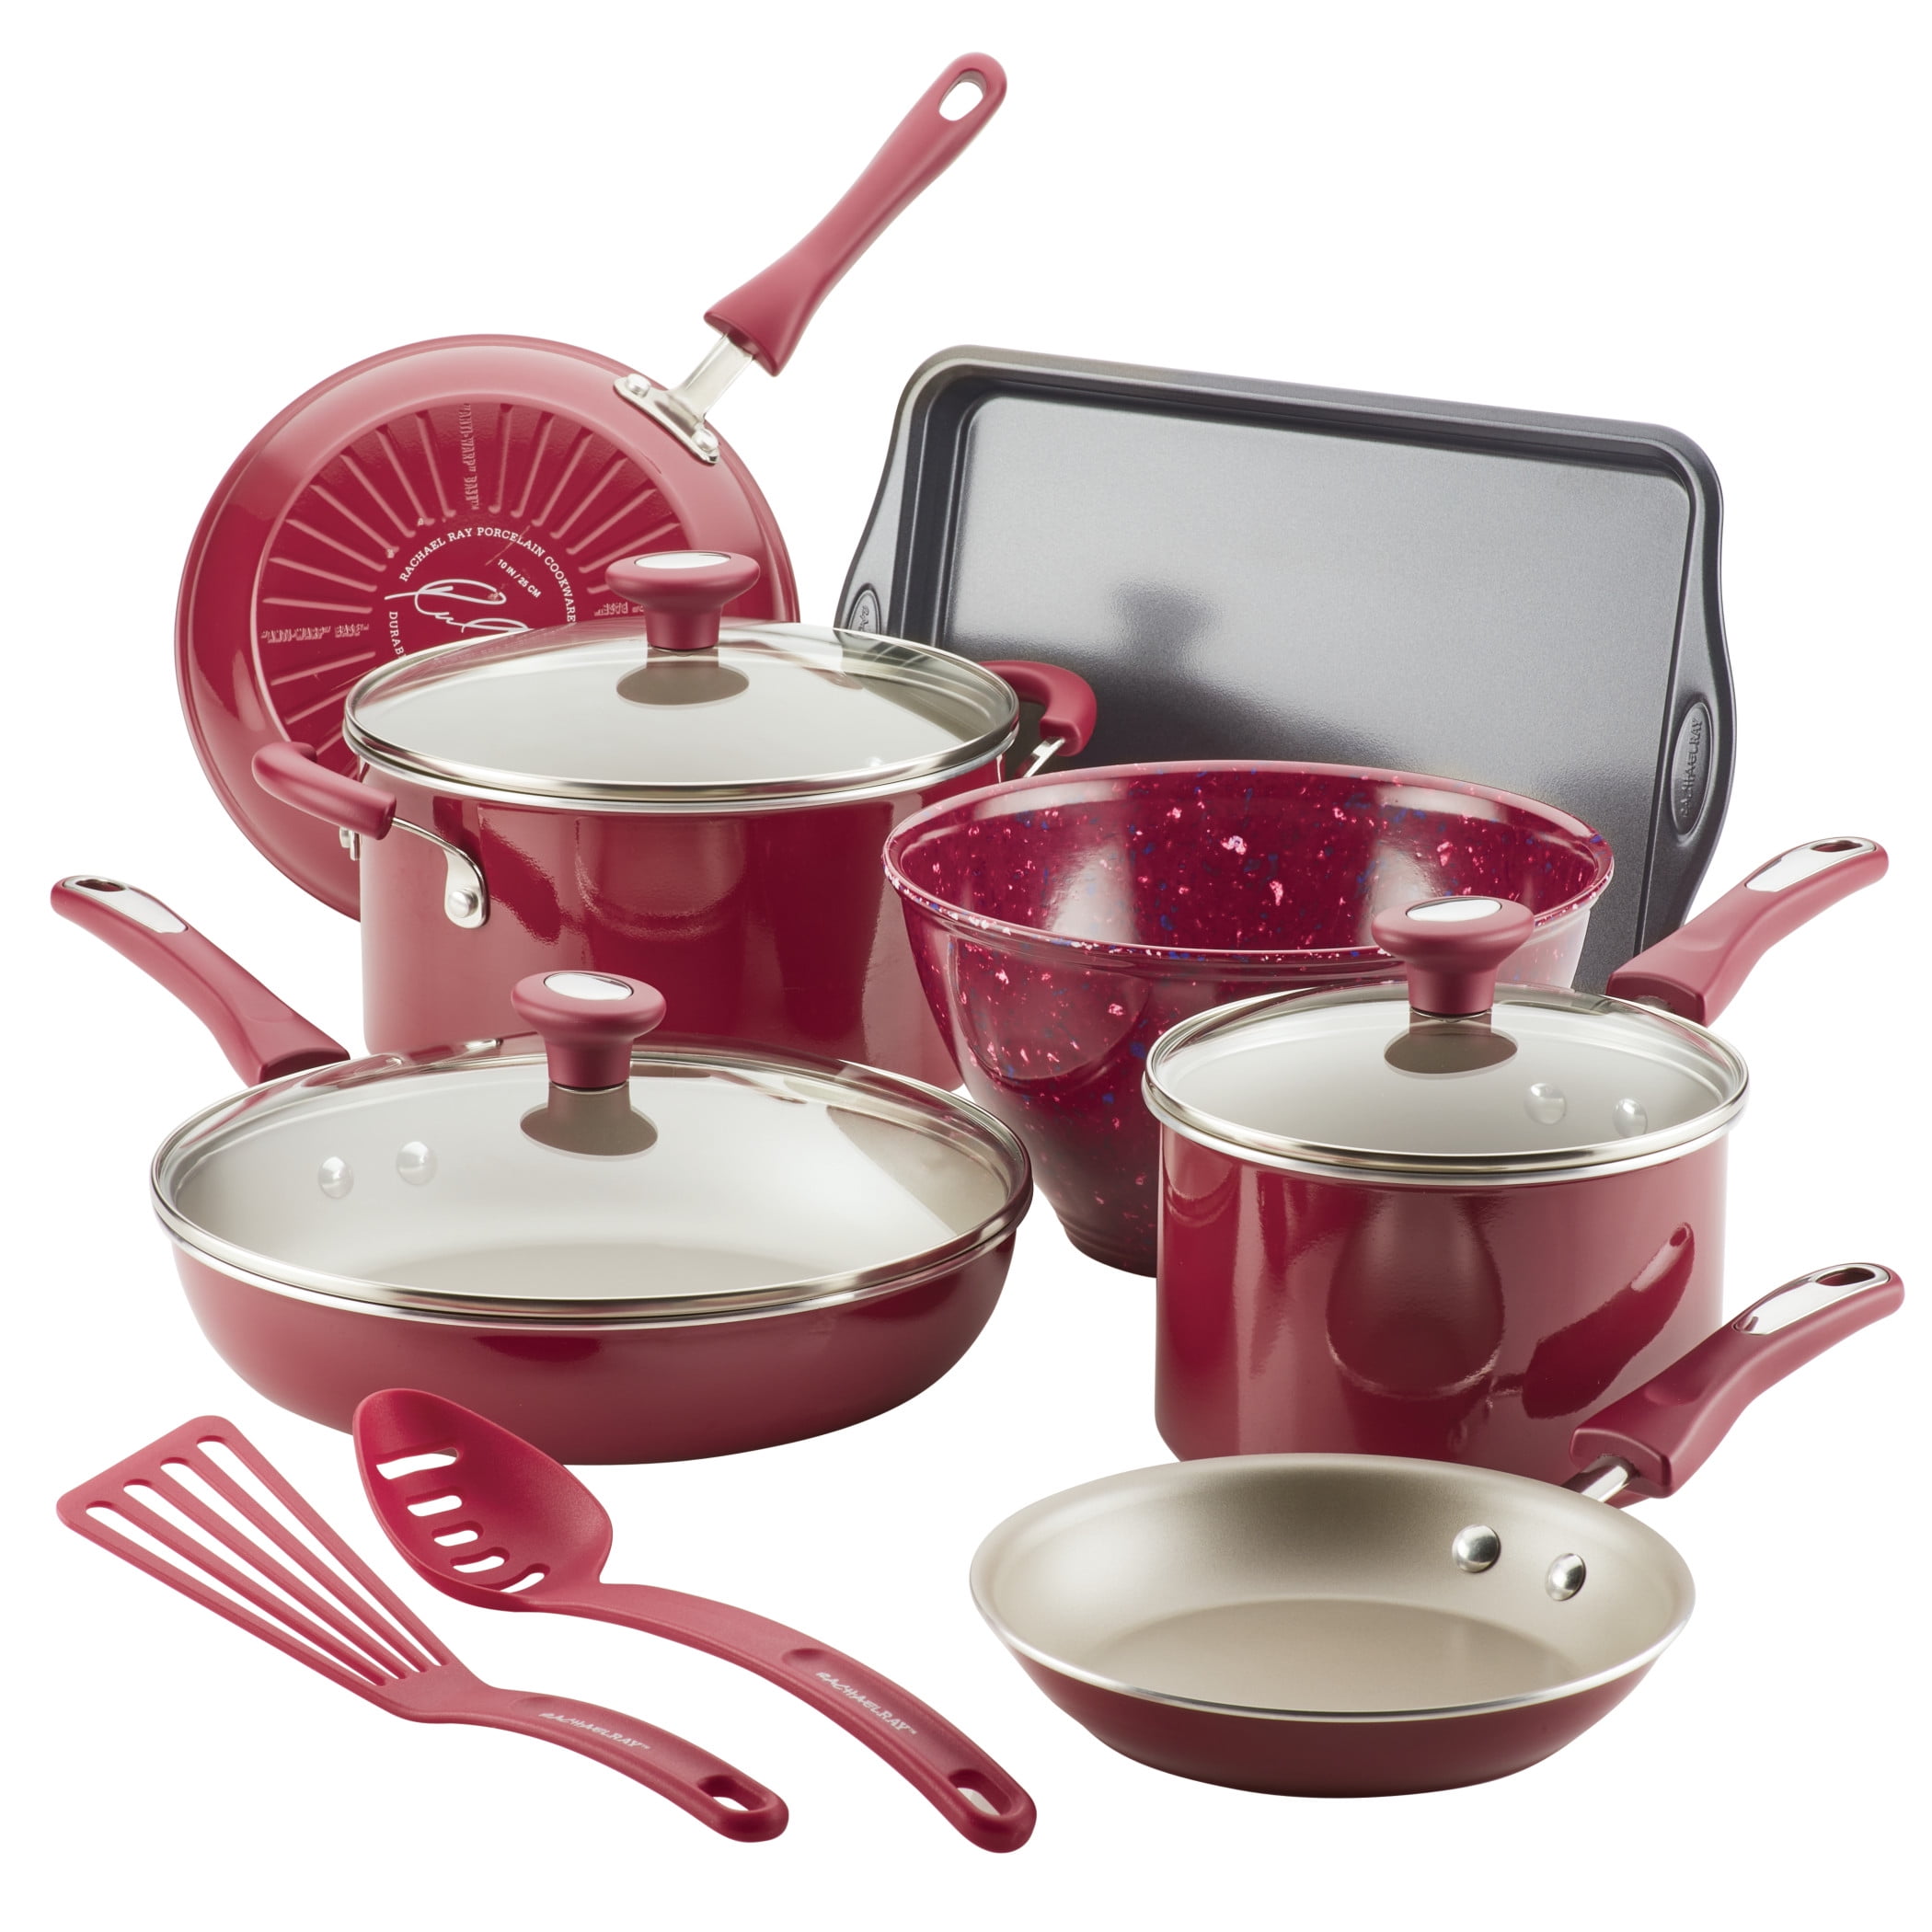 Rachael Ray 12-Piece Get Cooking! Nonstick Pots and Pans Set